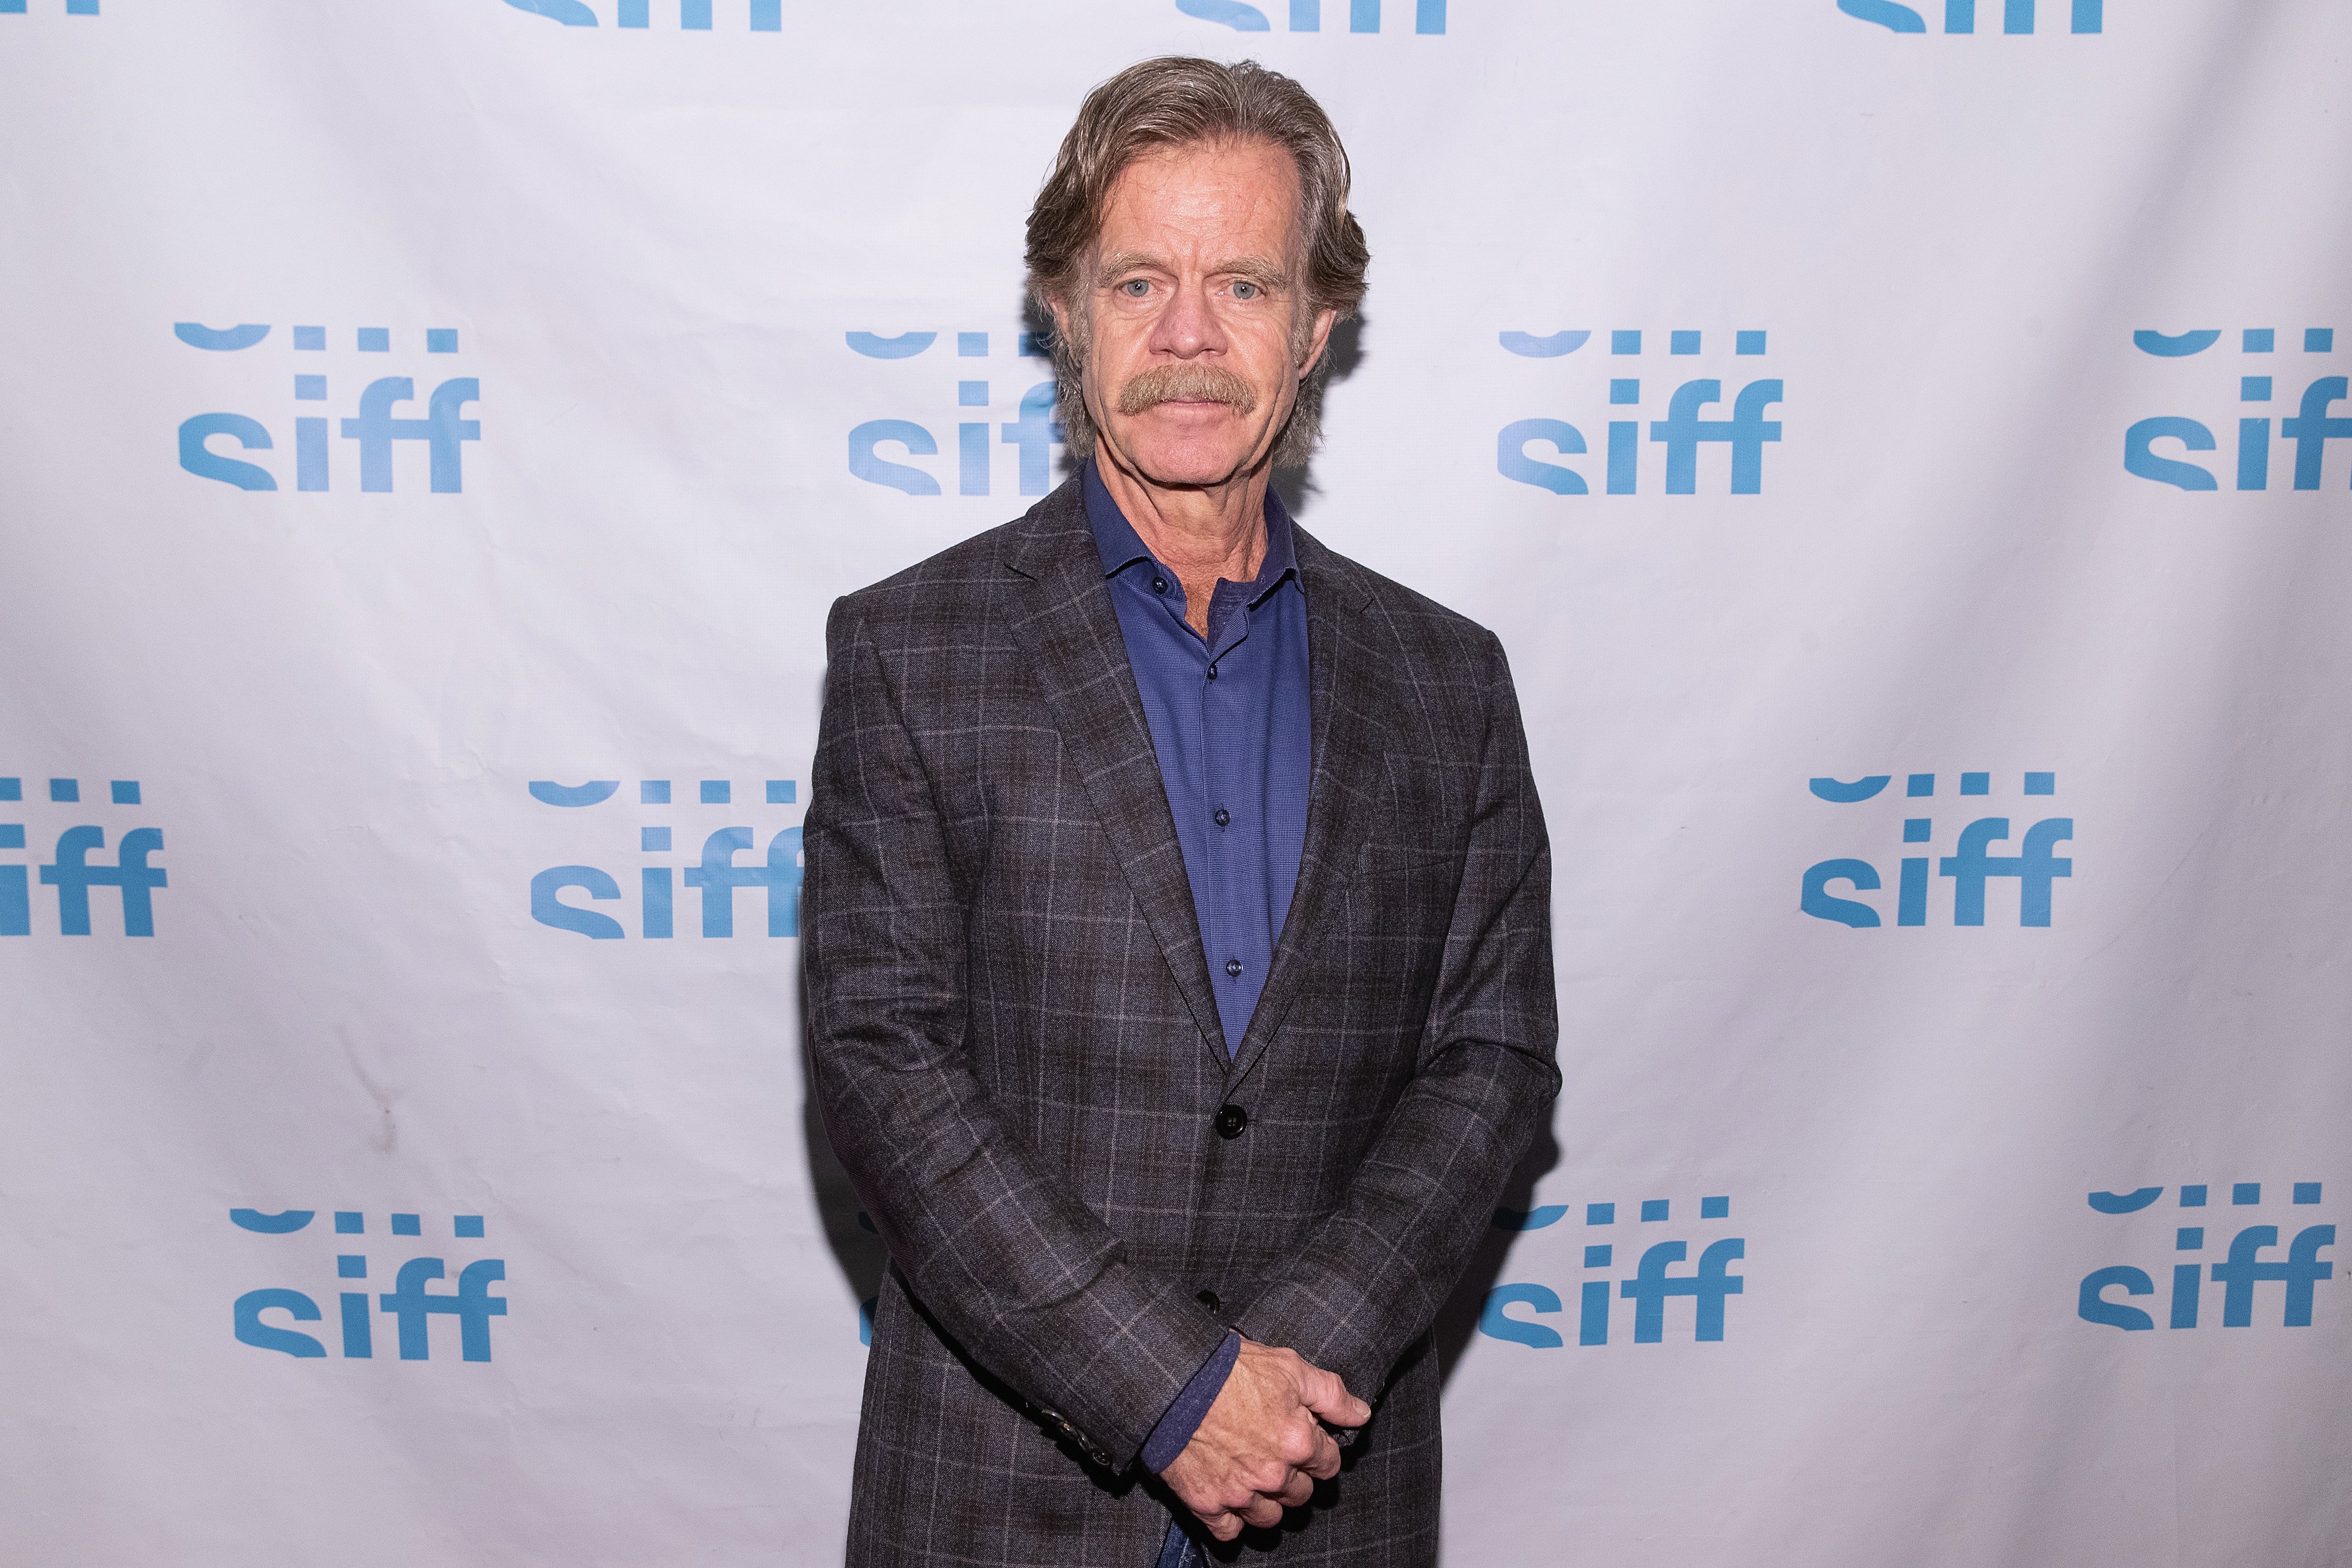 William H Macy attends a screening of "Stealing Cars" in Seattle, Washington on March 7, 2019 | Photo: Getty Images